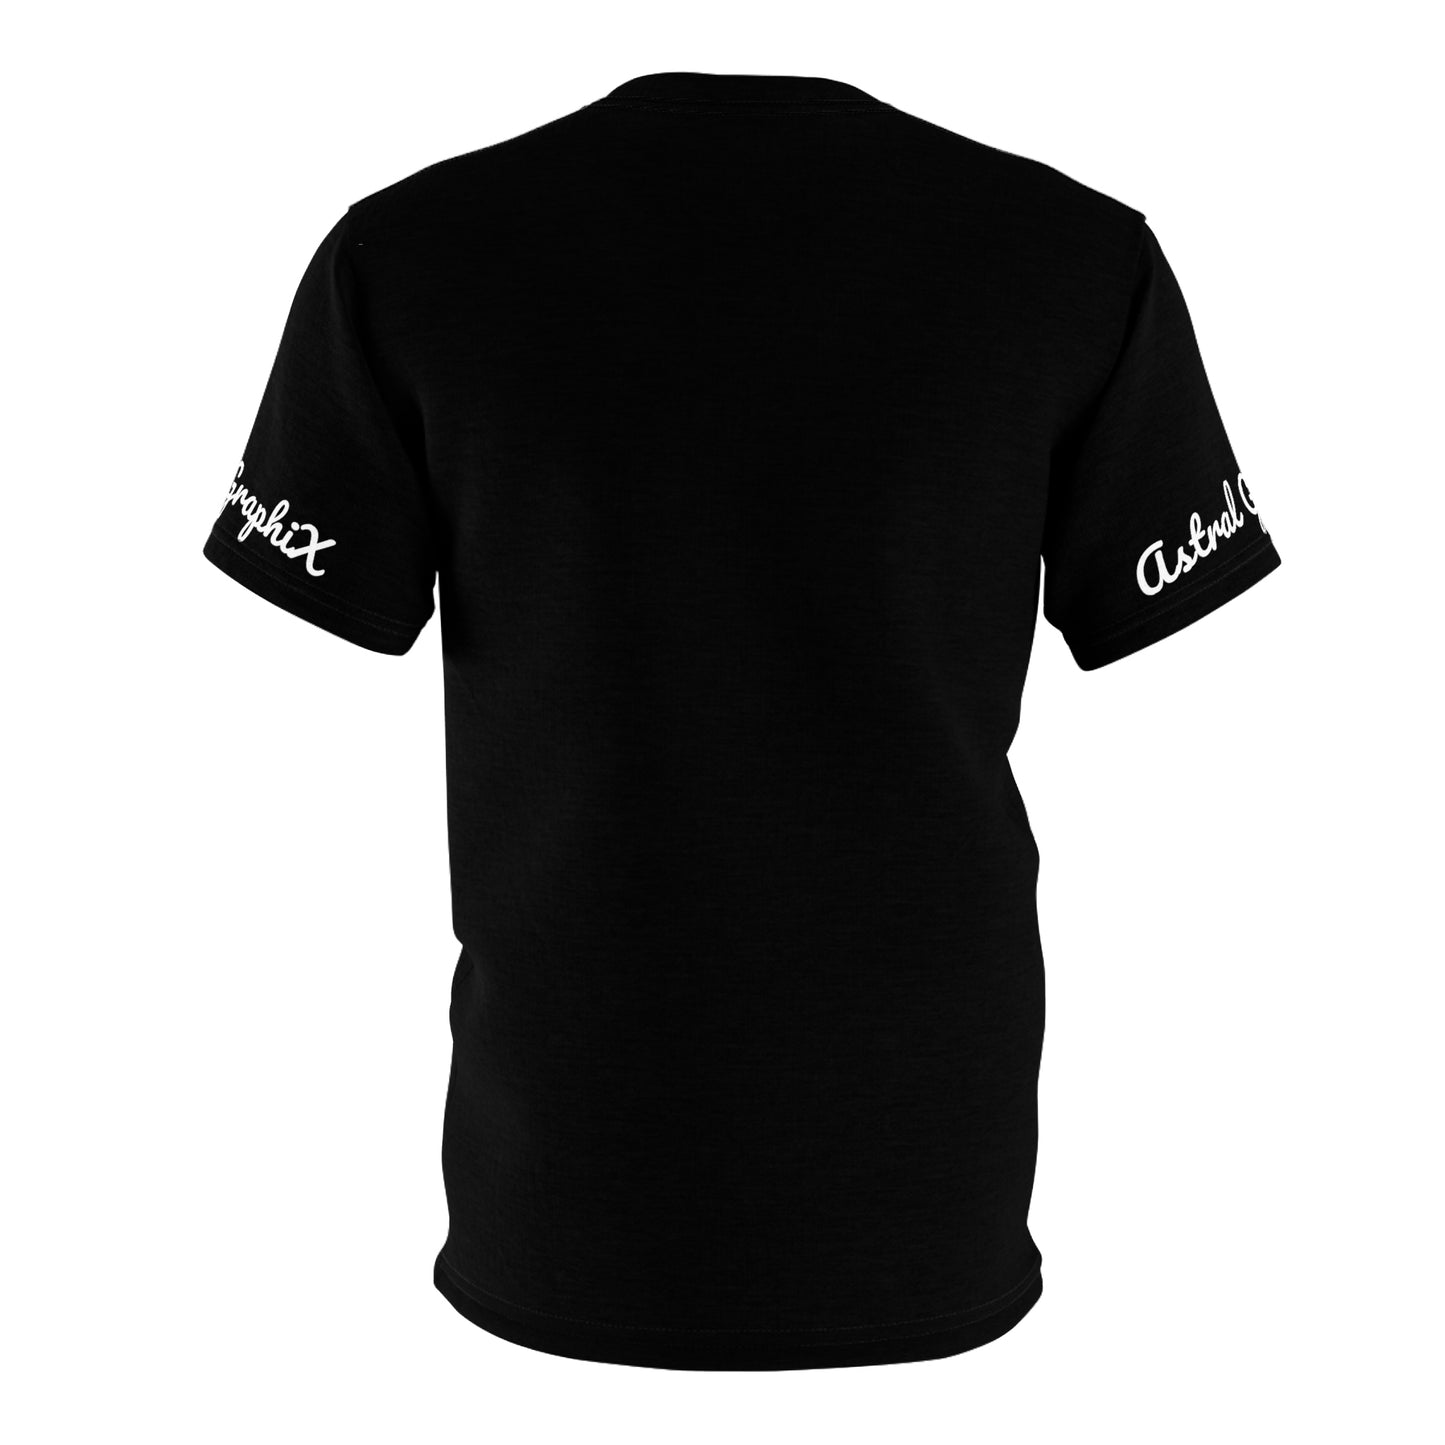 Word Art Collection - Unisex AOP Cut & Sew Tee - Never Give Up in Black